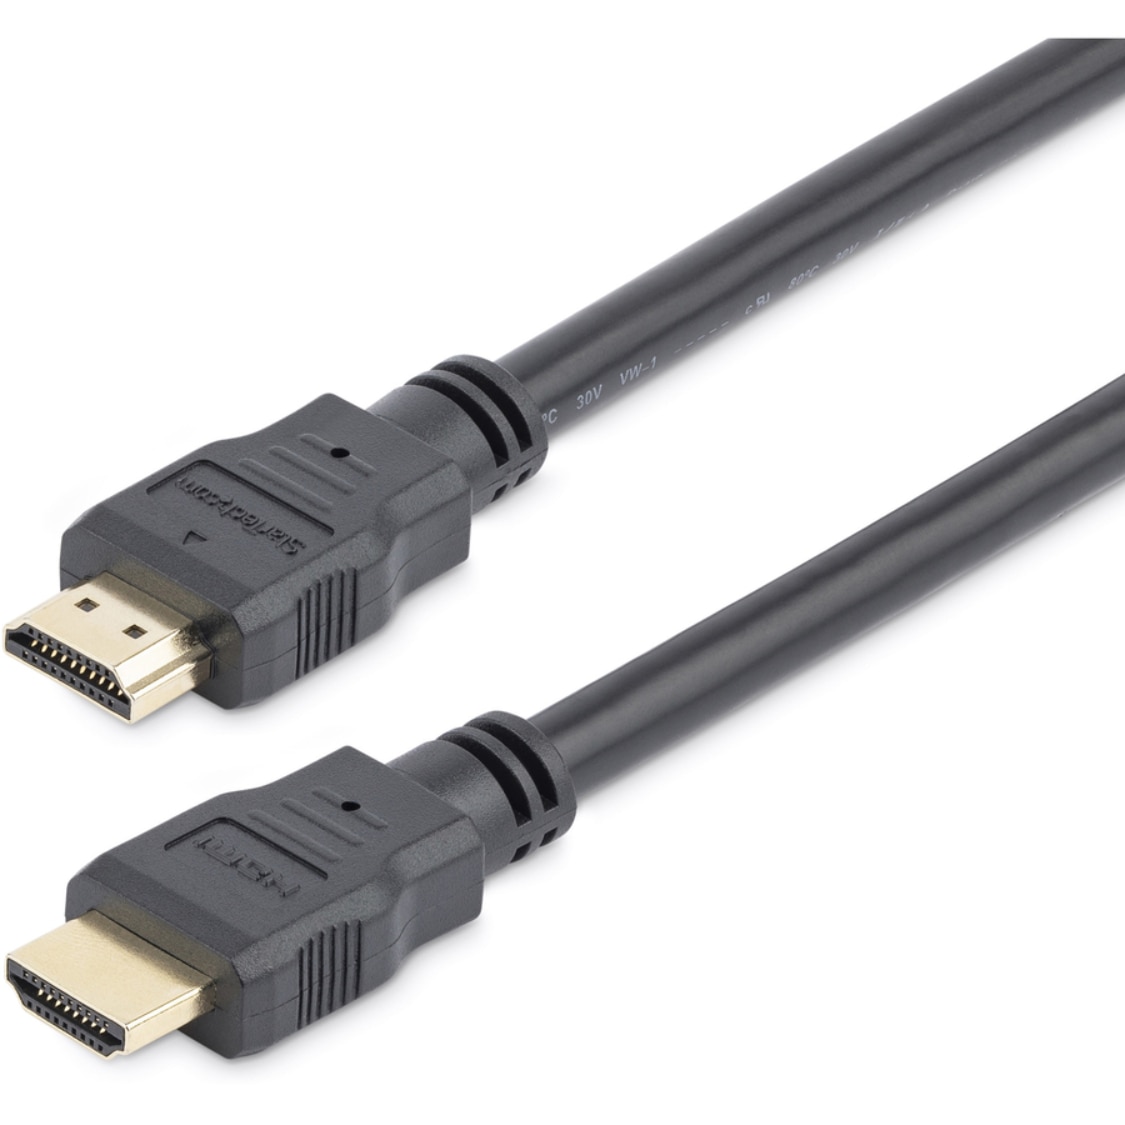 Startech 10' High Speed HDMI Cable